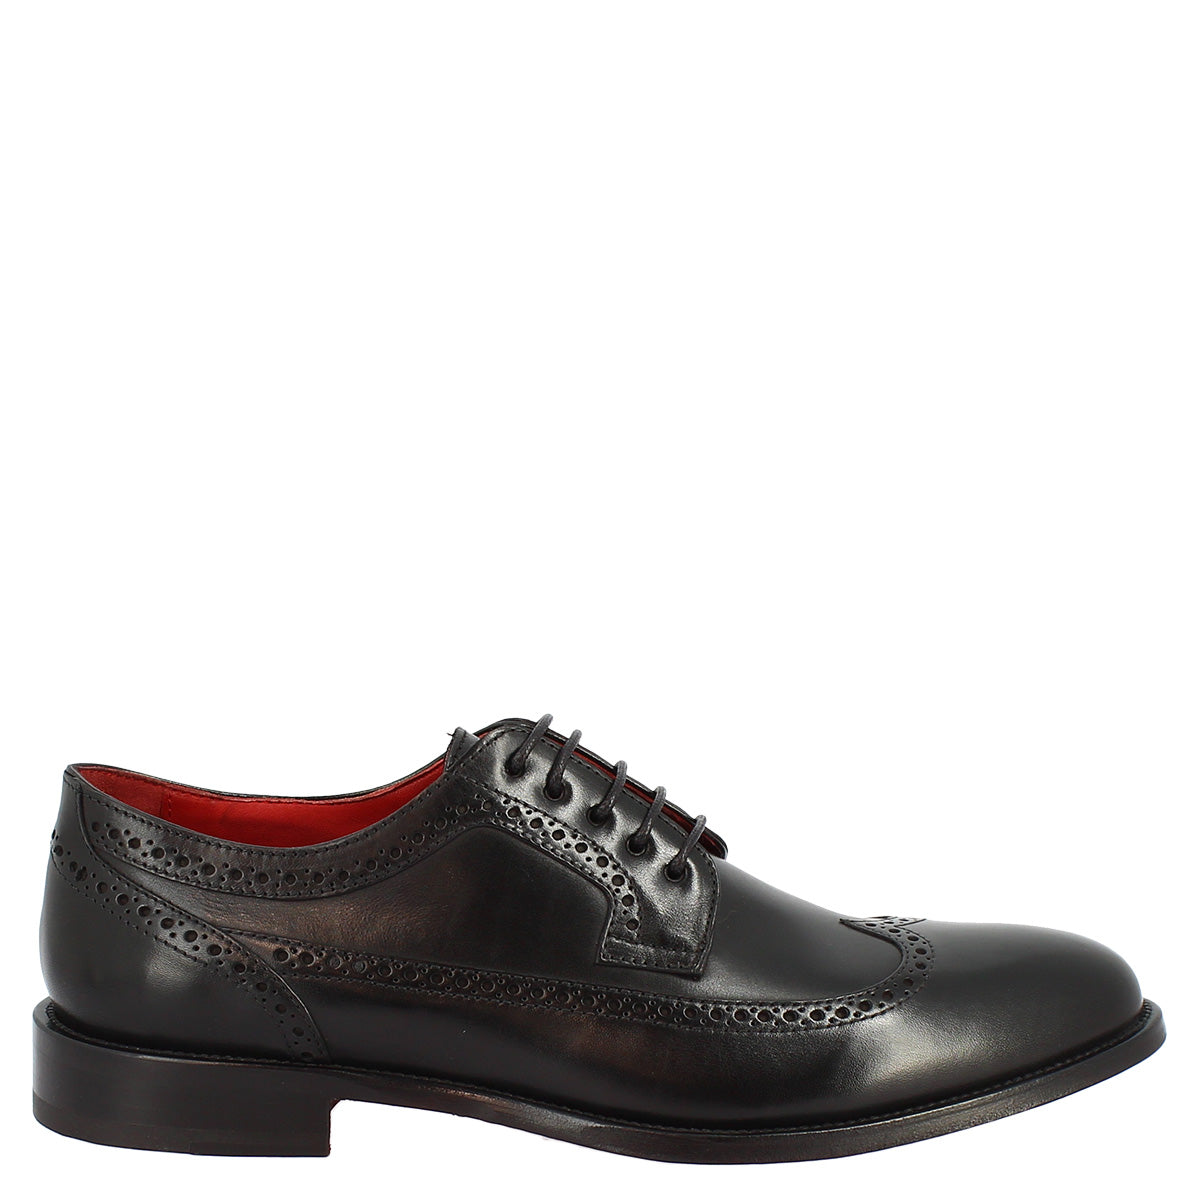 Men's handmade lace-up half brogues shoes in black calf leather